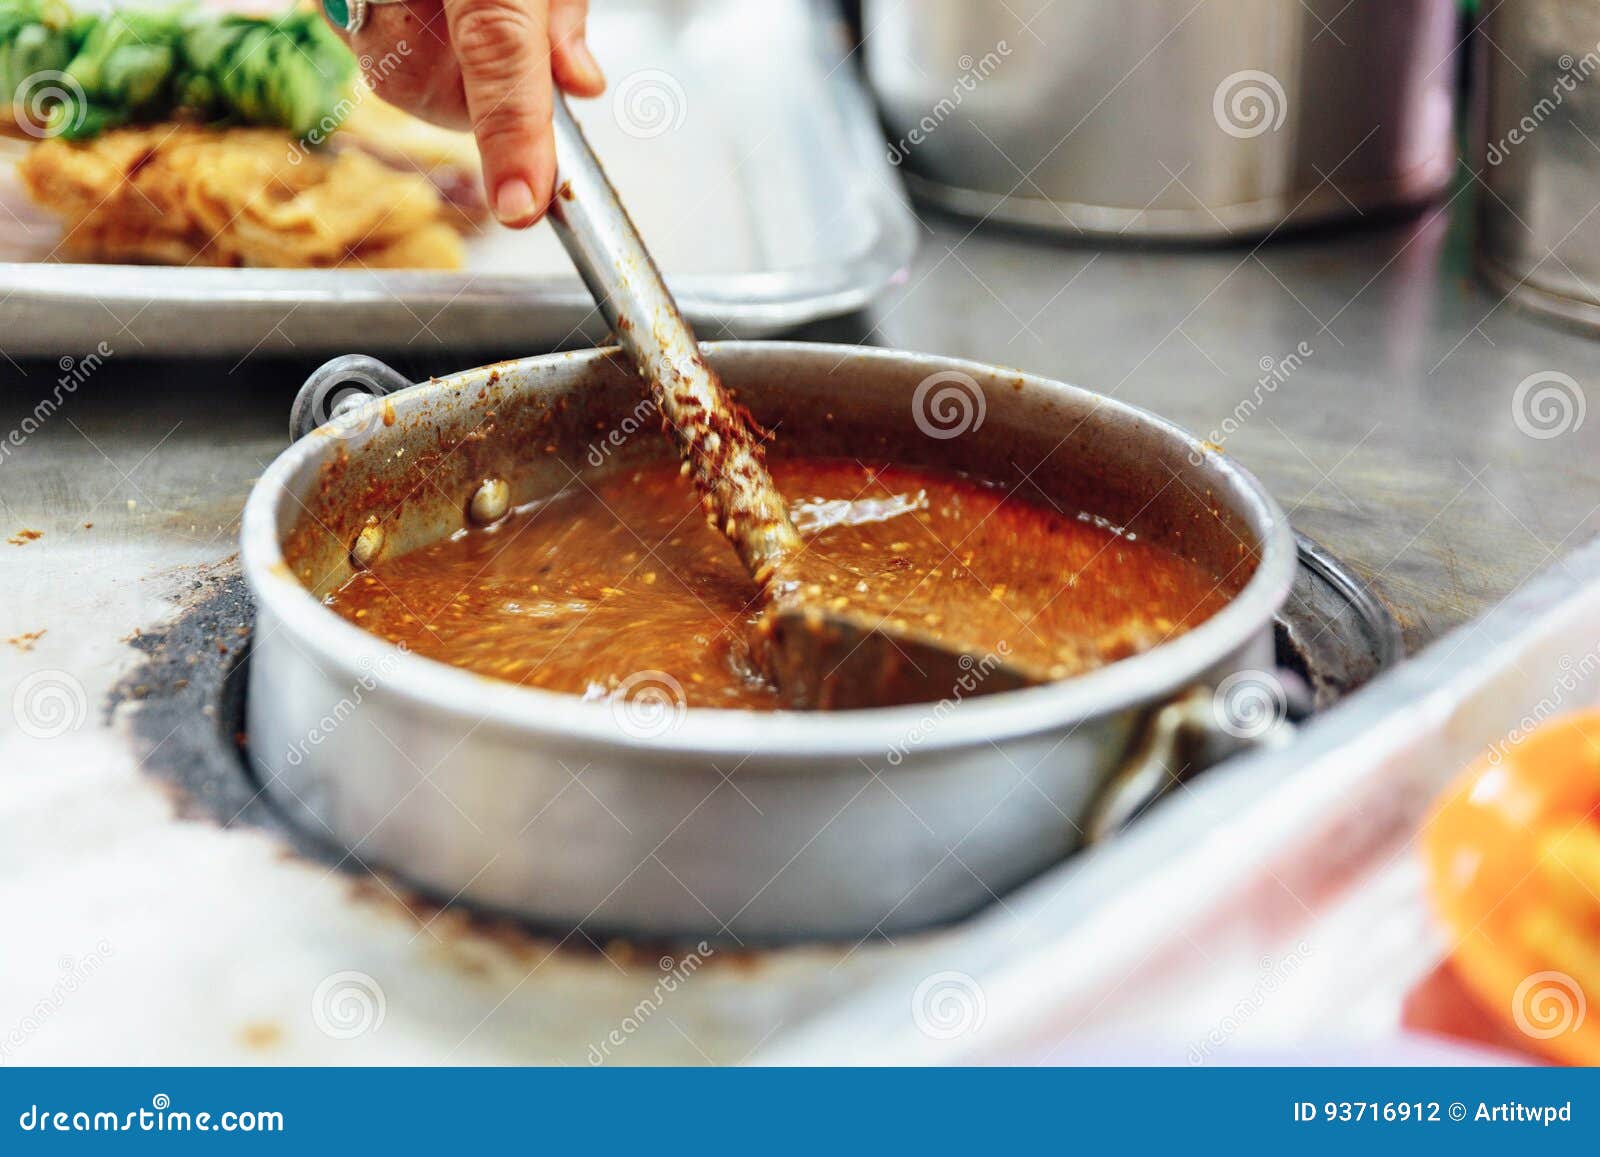 warming satay sauce in the pot. satay is a dish of skewered grilled meat with javanese origins in malacca city, malacca, malaysia